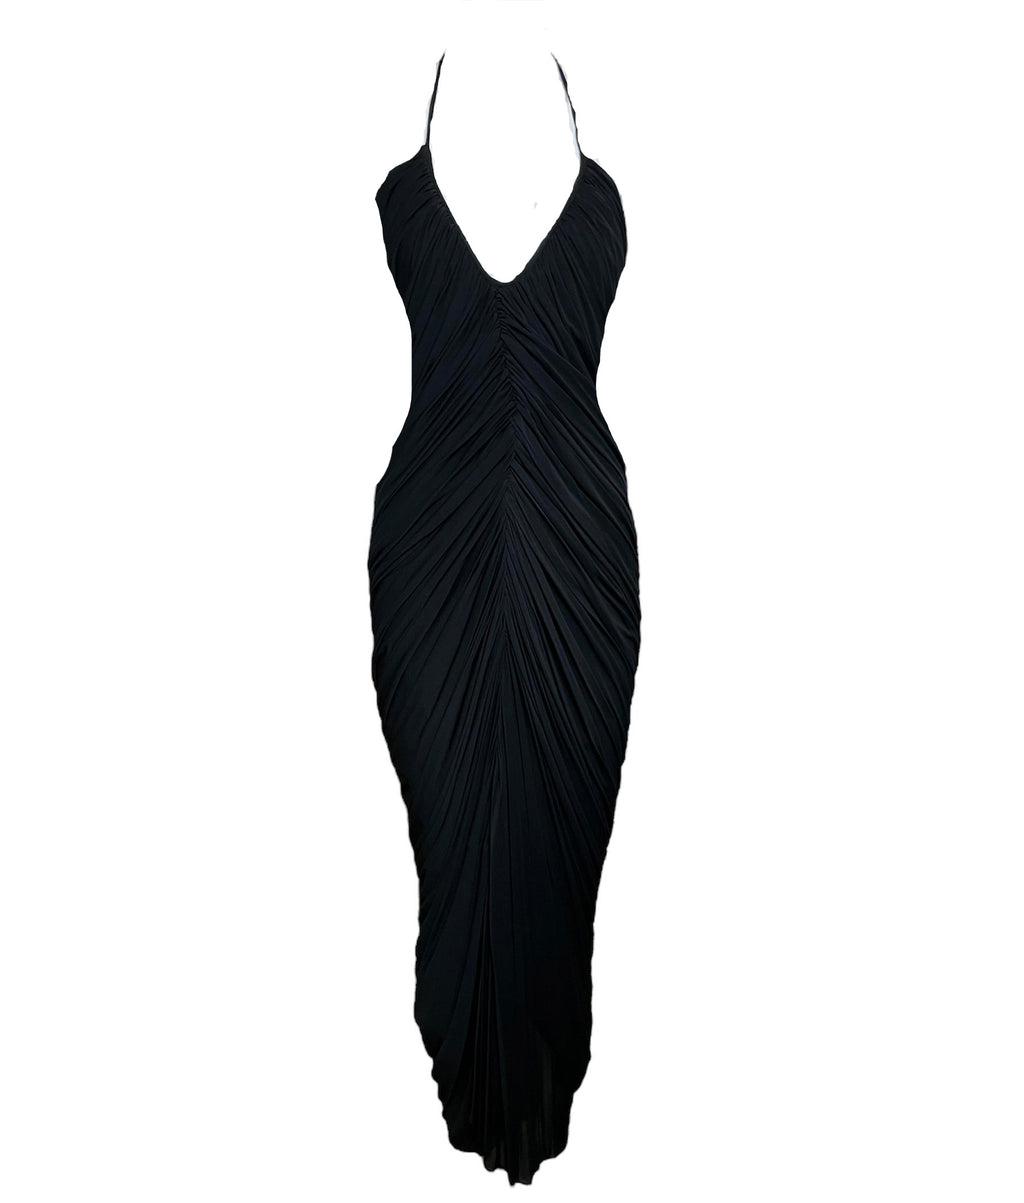 Halston Fall 1981 Black "Sexy Slink" Jersey Halter/One Shoulder Gown FRONT 1 of 4